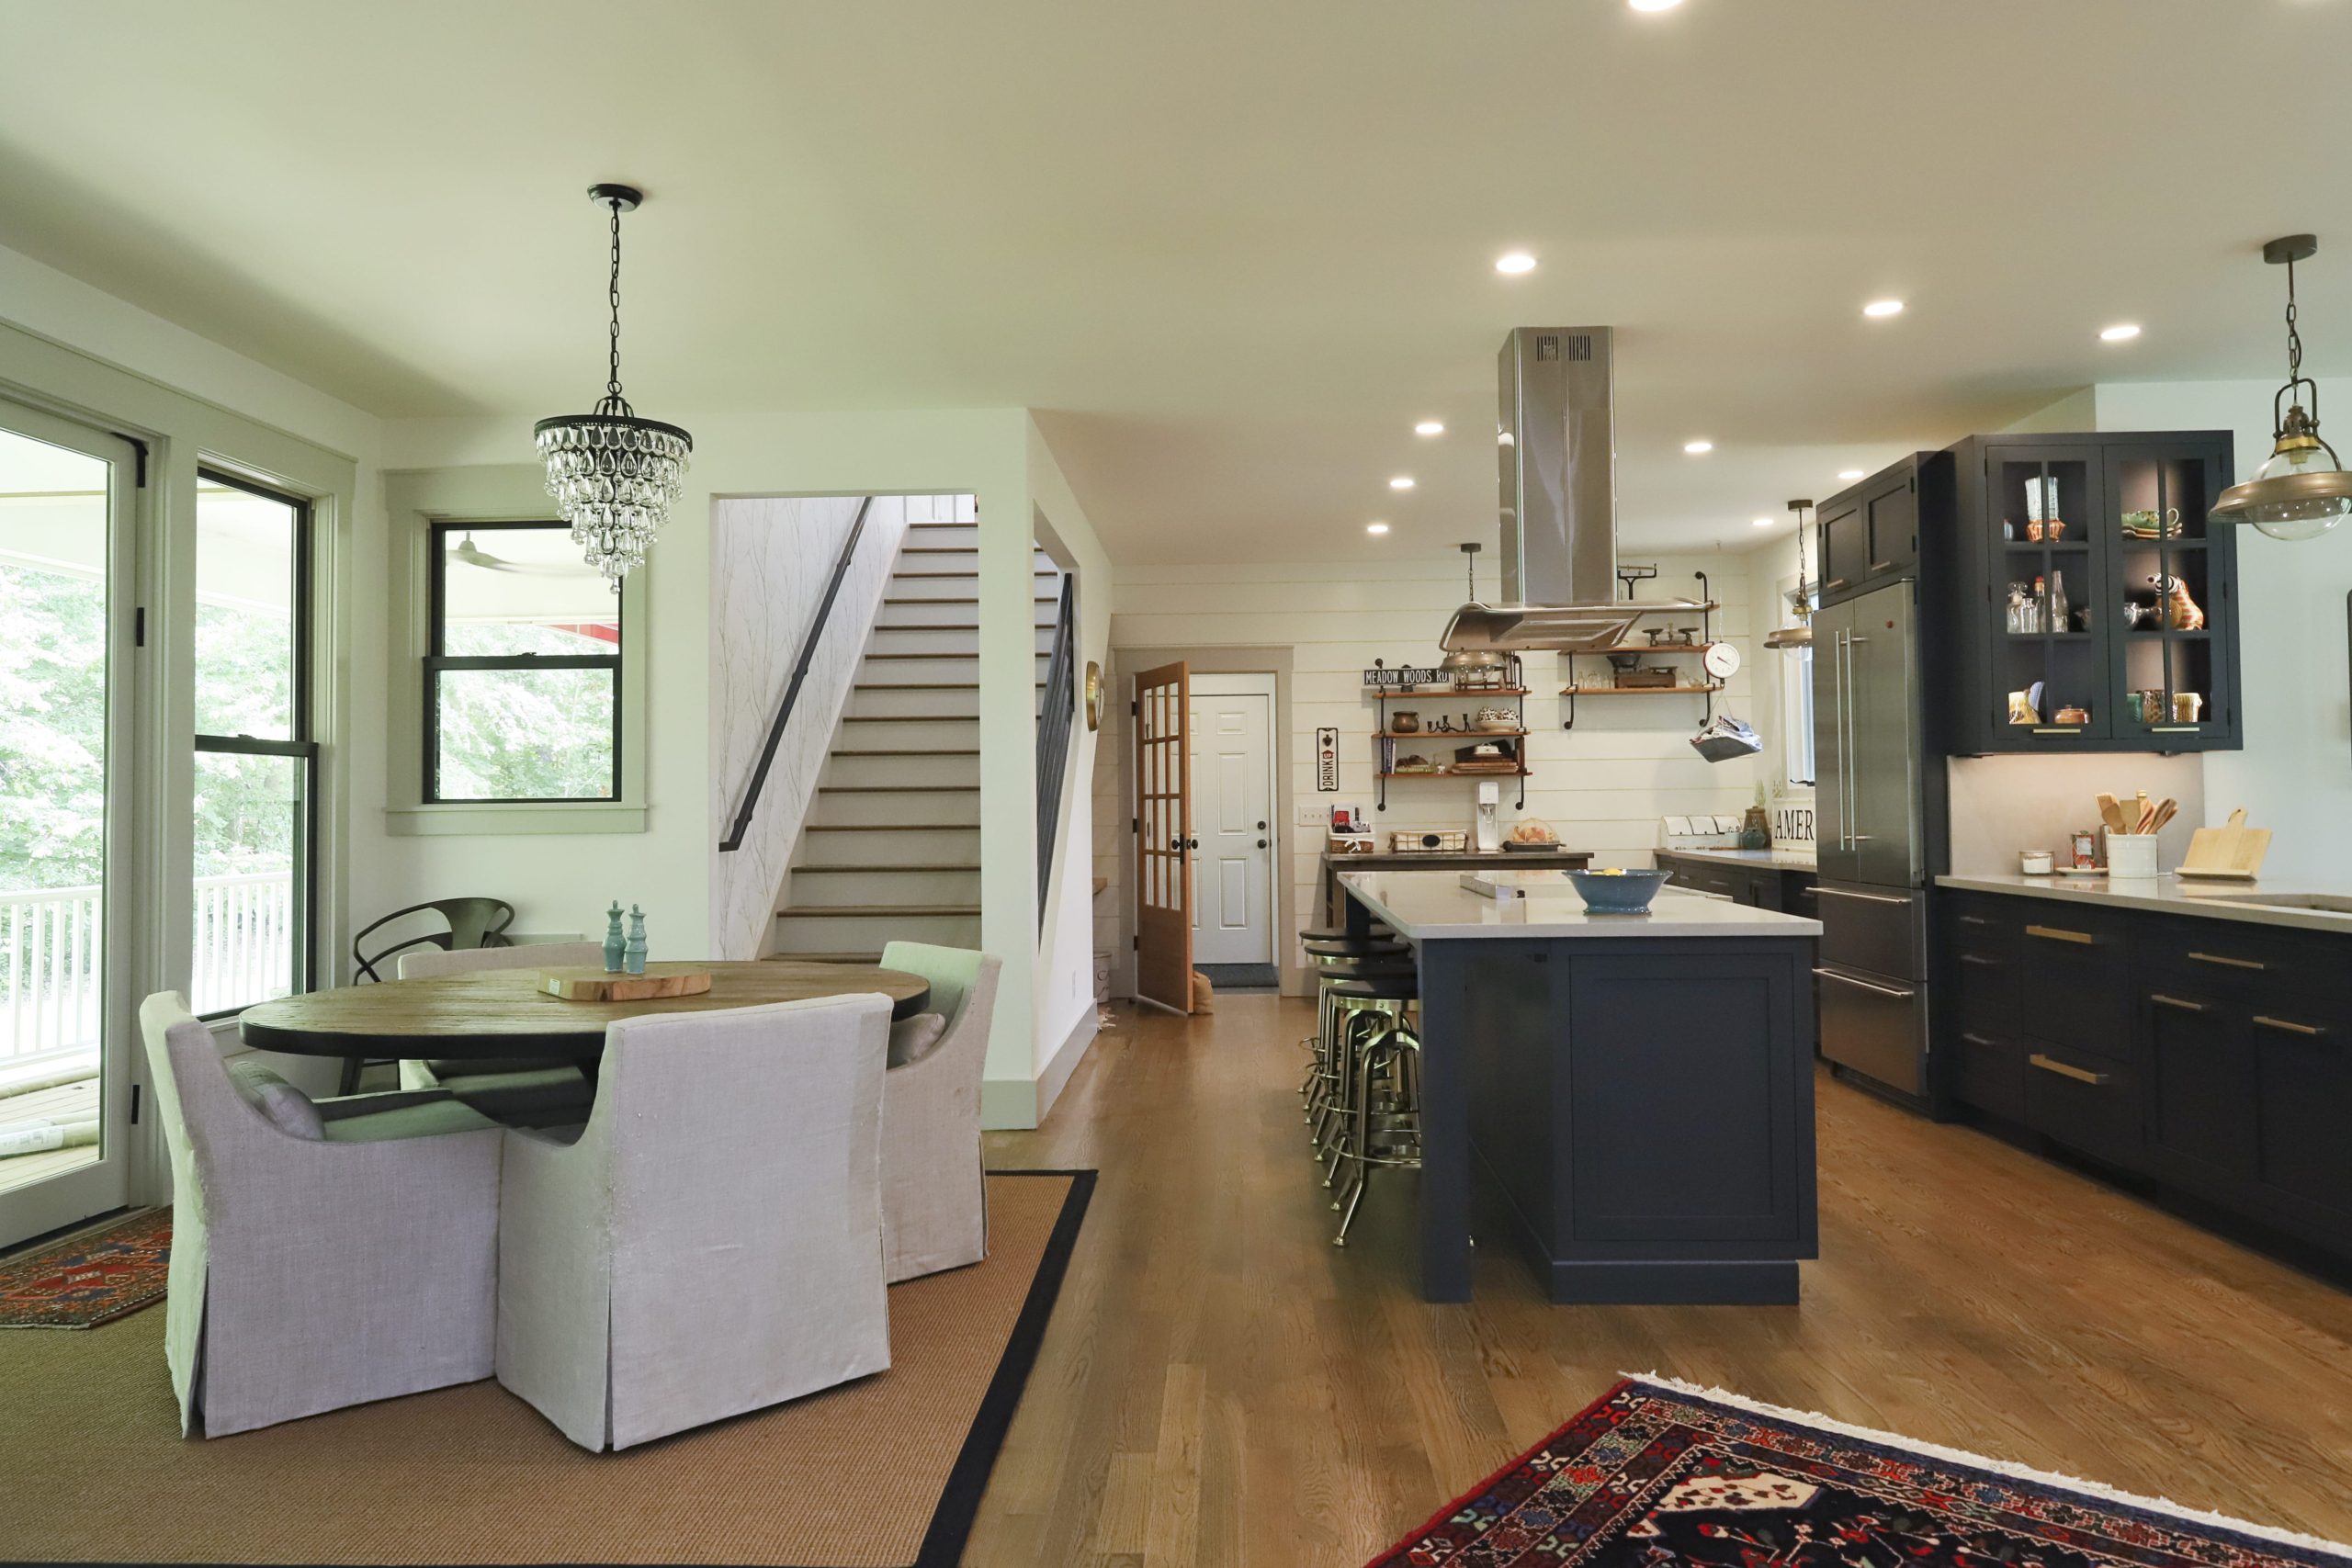 An open-plan kitchen, adjacent to a covered porch, has a large central island, dining nook, and floating shelves.